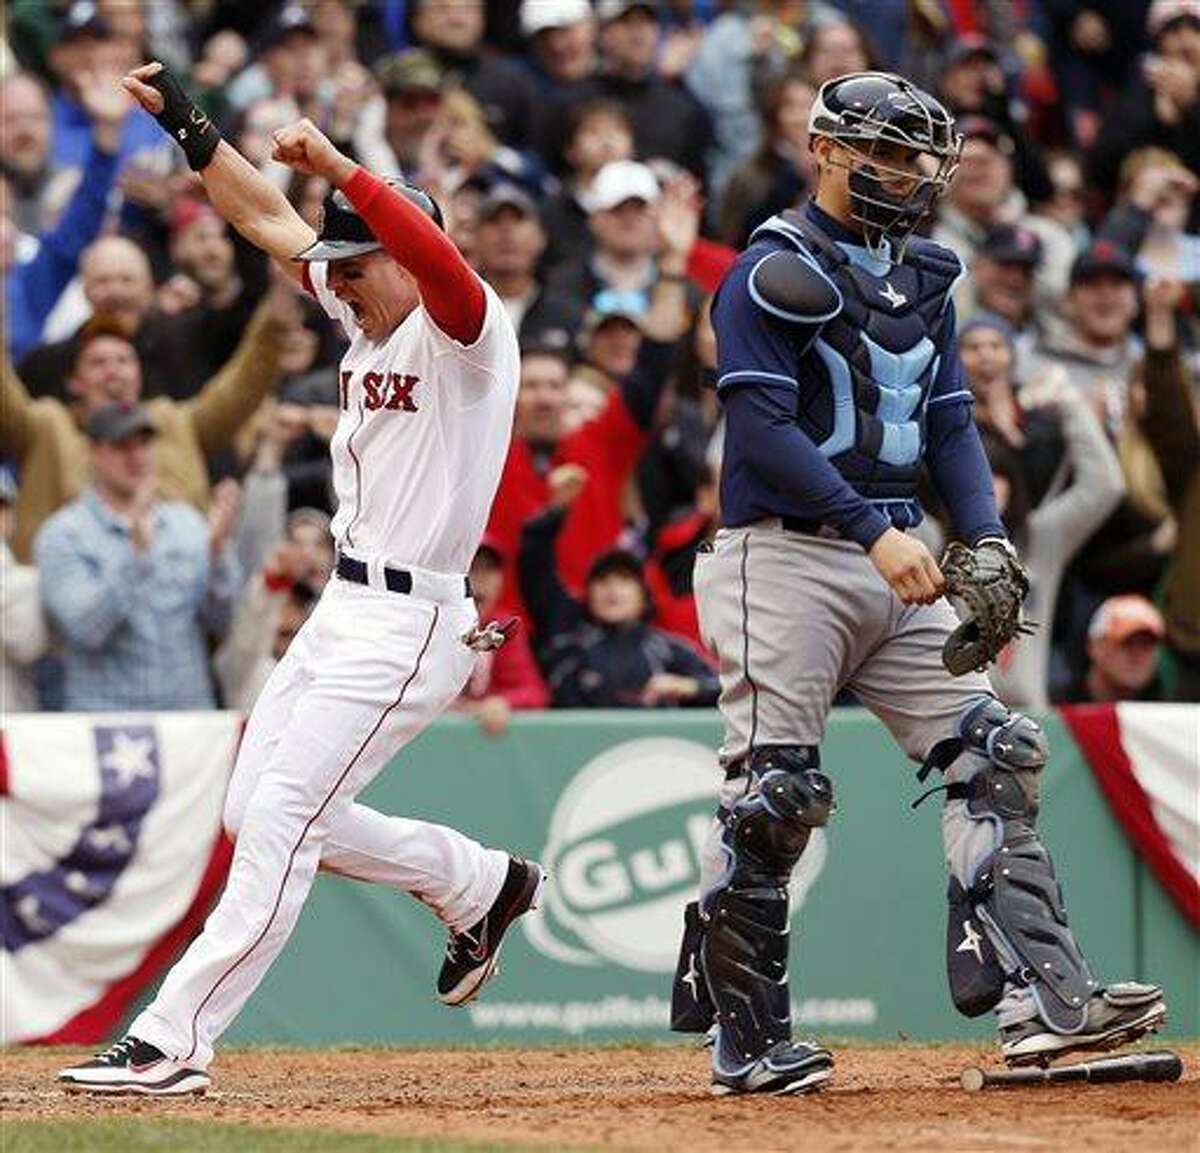 Boston Red Sox's Jacoby Ellsbury, left, celebrates behind Tampa Bay Rays' Jose Lobaton as he scores the game-winning run on an RBI single by teammate Shane Victorino in the 10th inning of a baseball game in Boston, Saturday, April 13, 2013. The Red Sox won 2-1. (AP Photo/Michael Dwyer)